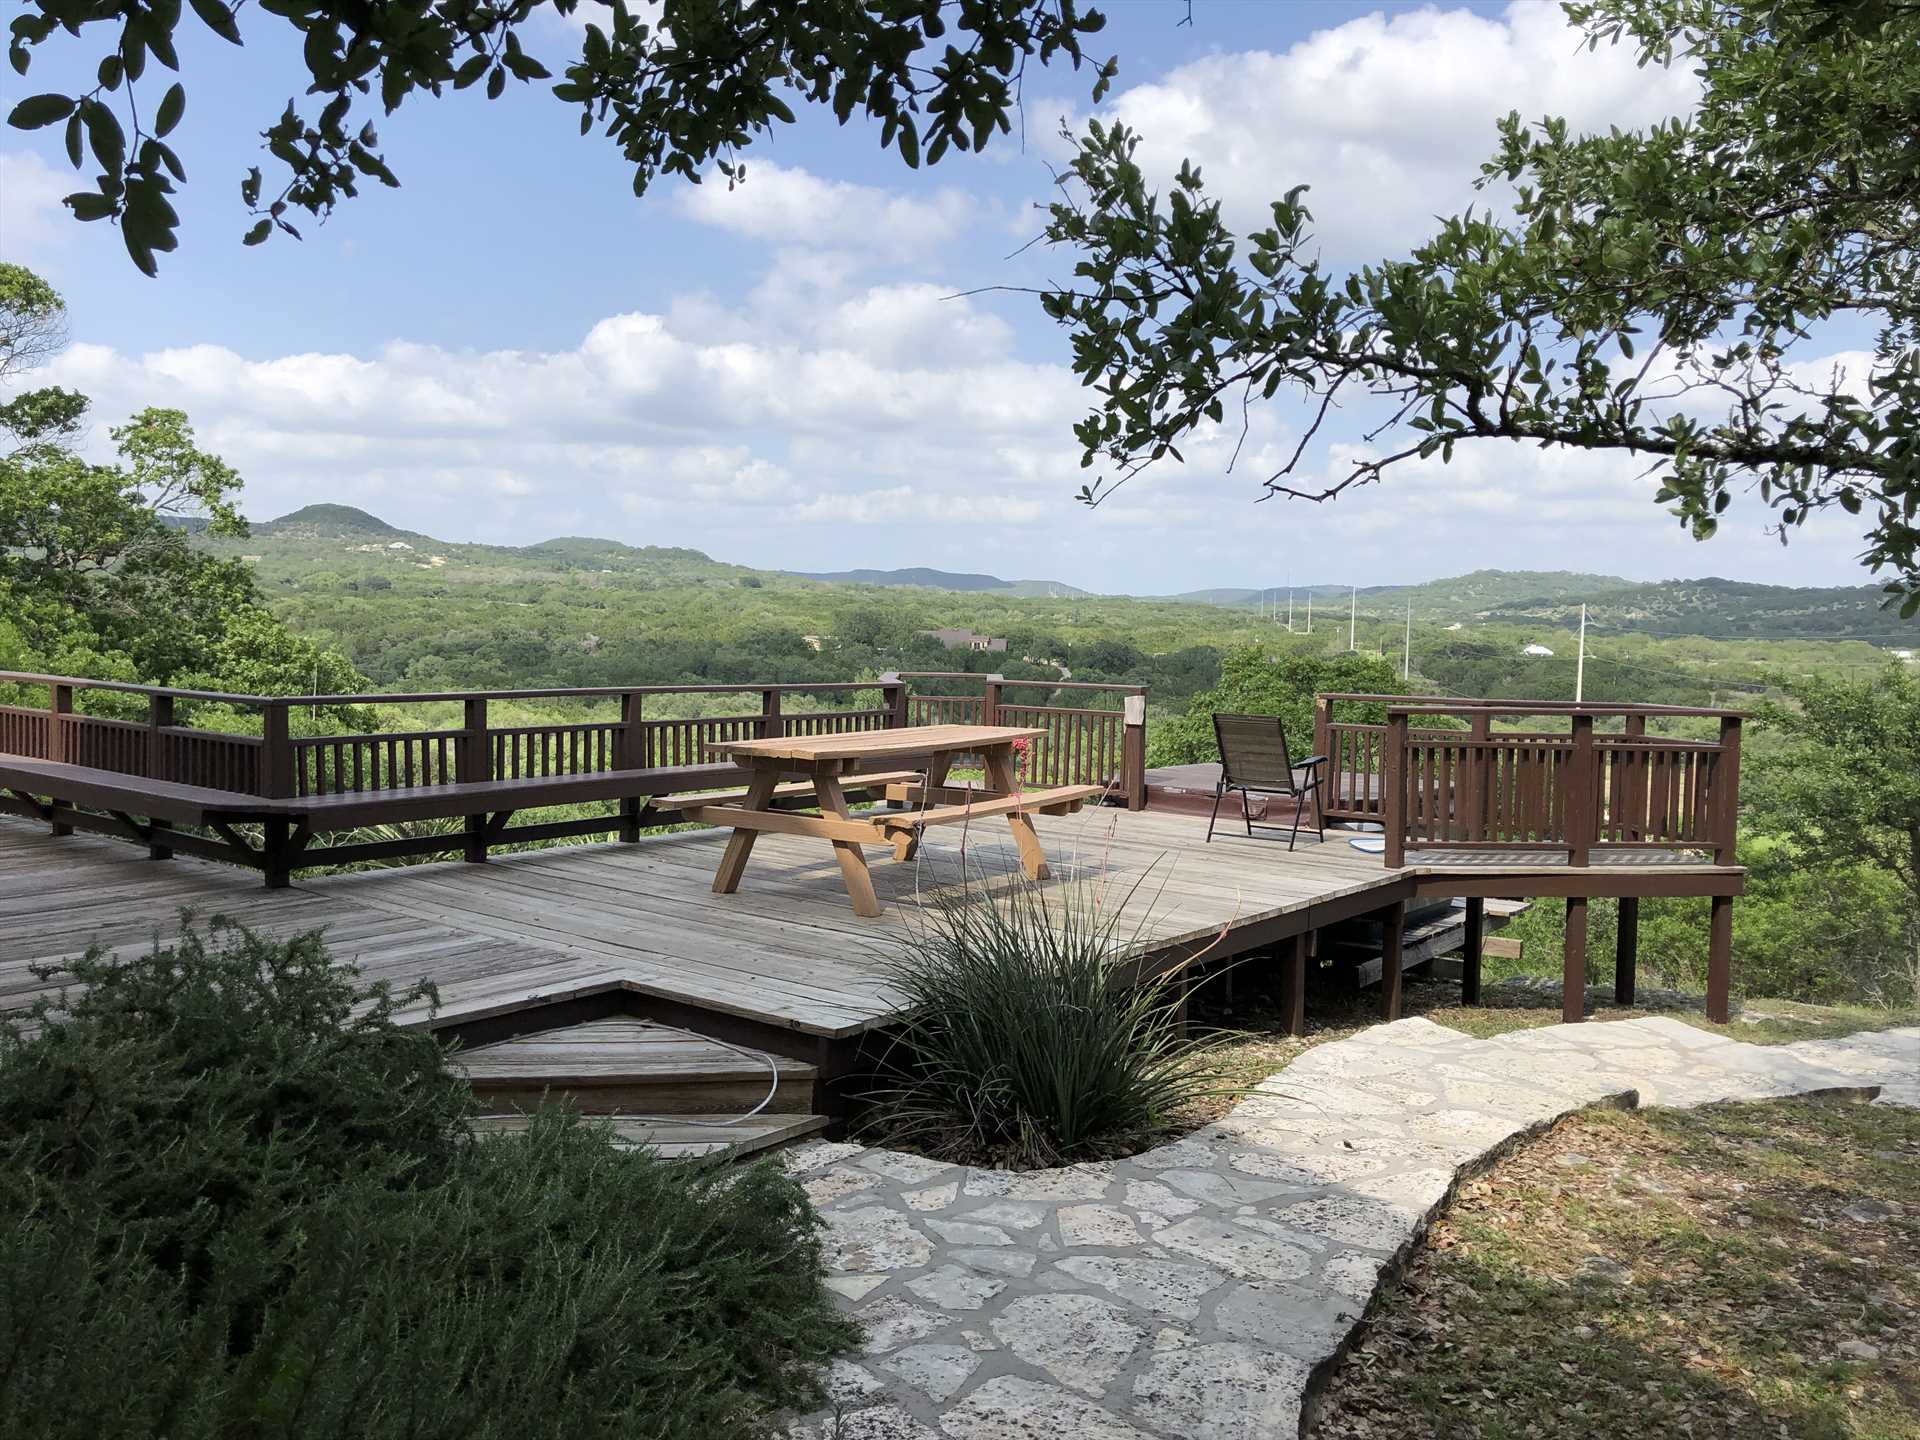                                                 These are some of the most impressive bird's-eye views of the Hill Country. Have a soak in the hot tub and take it all in!